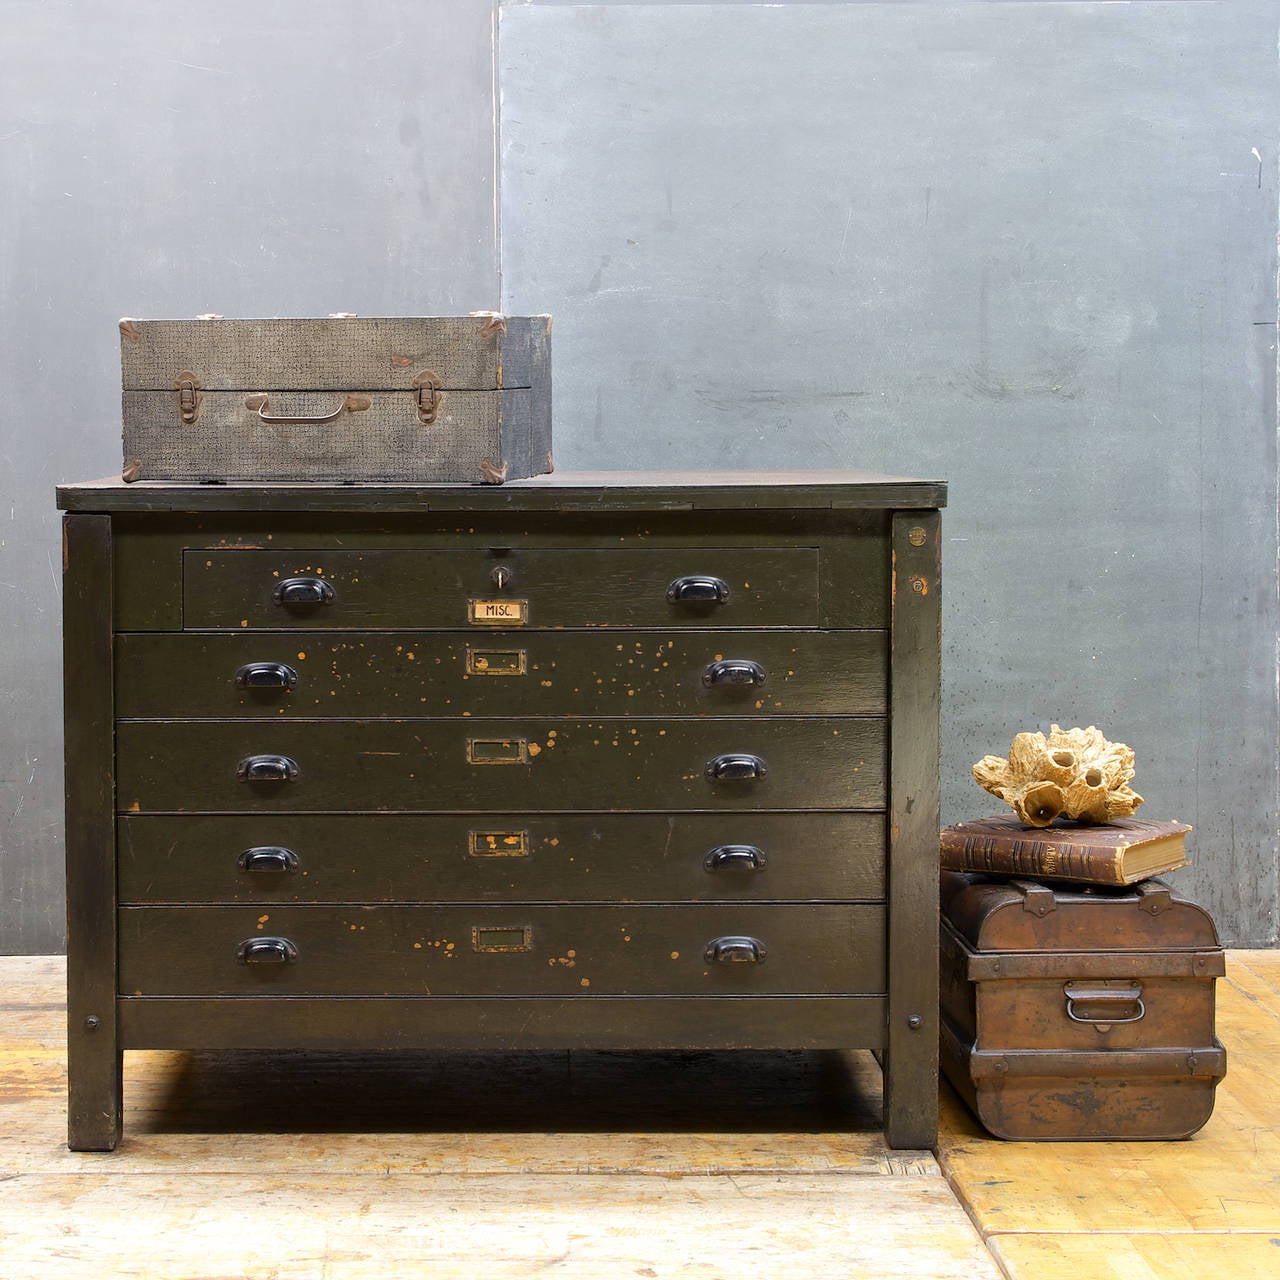 USA, c.1880s.  Industrial Factory Furniture Flat File Cabinet by the Gilbert & Barker Manufacturing Co. of Springfield, Massachusetts. Famous for their Gas Pump manufacturing throughout the early 20th century.

Brass Markers Mark, 